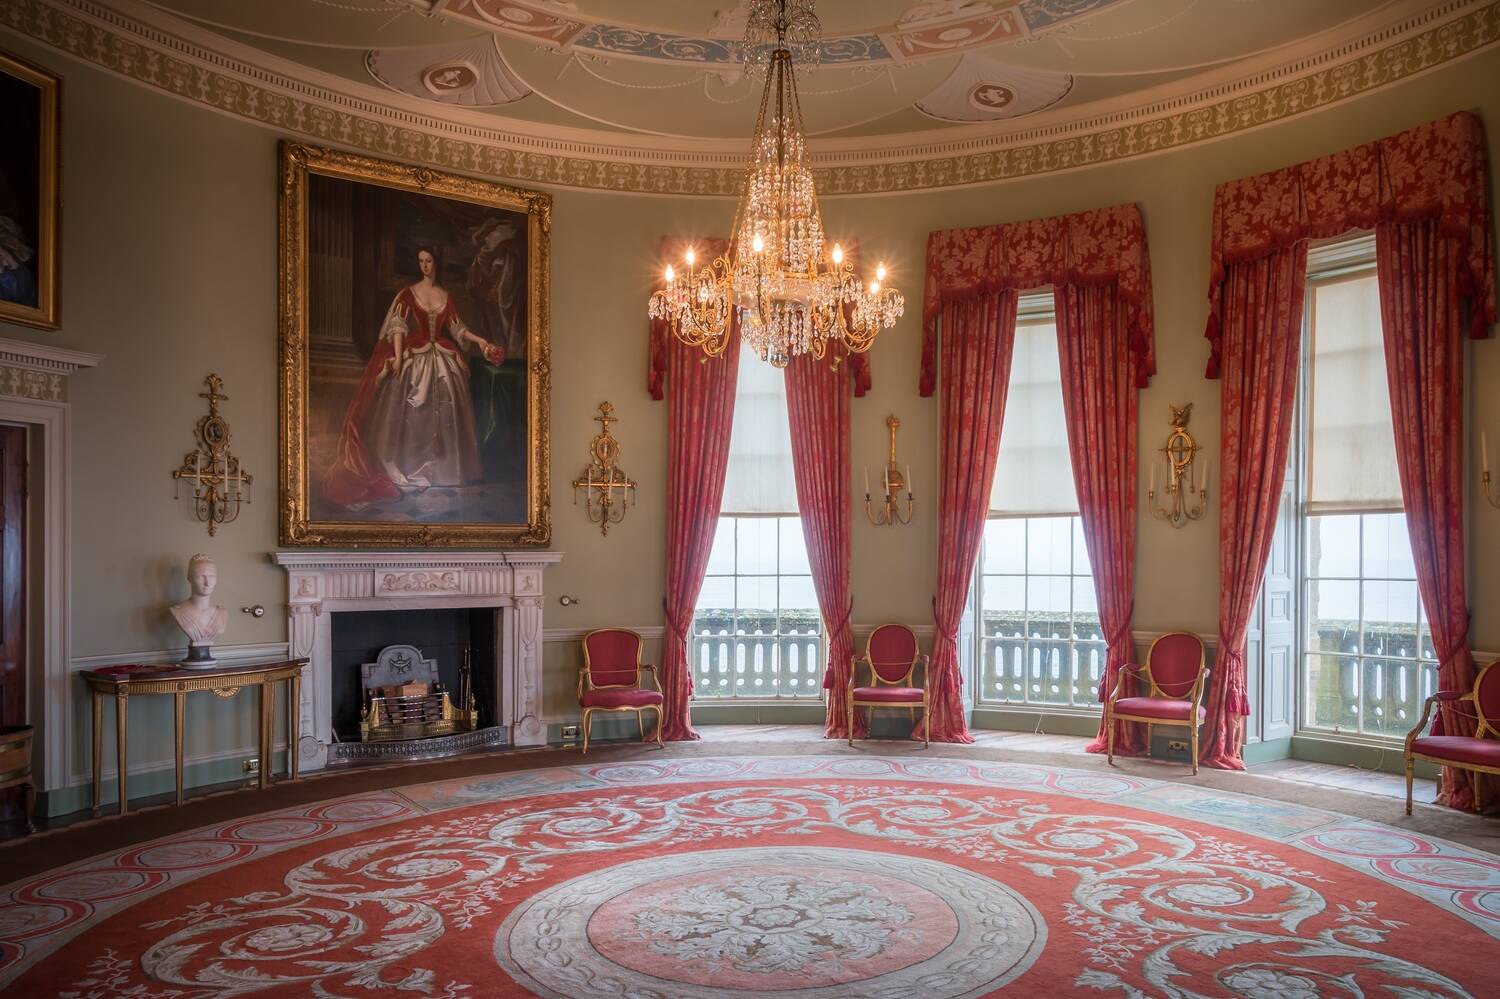 A view of the Round Drawing Room at Culzean Castle, showing the circular room. Floor-to-ceiling red curtains hang at the three large windows. Further round large, gilt-framed portraits hang on the wall above the fireplace. A large circular red patterned rug fills the floor.